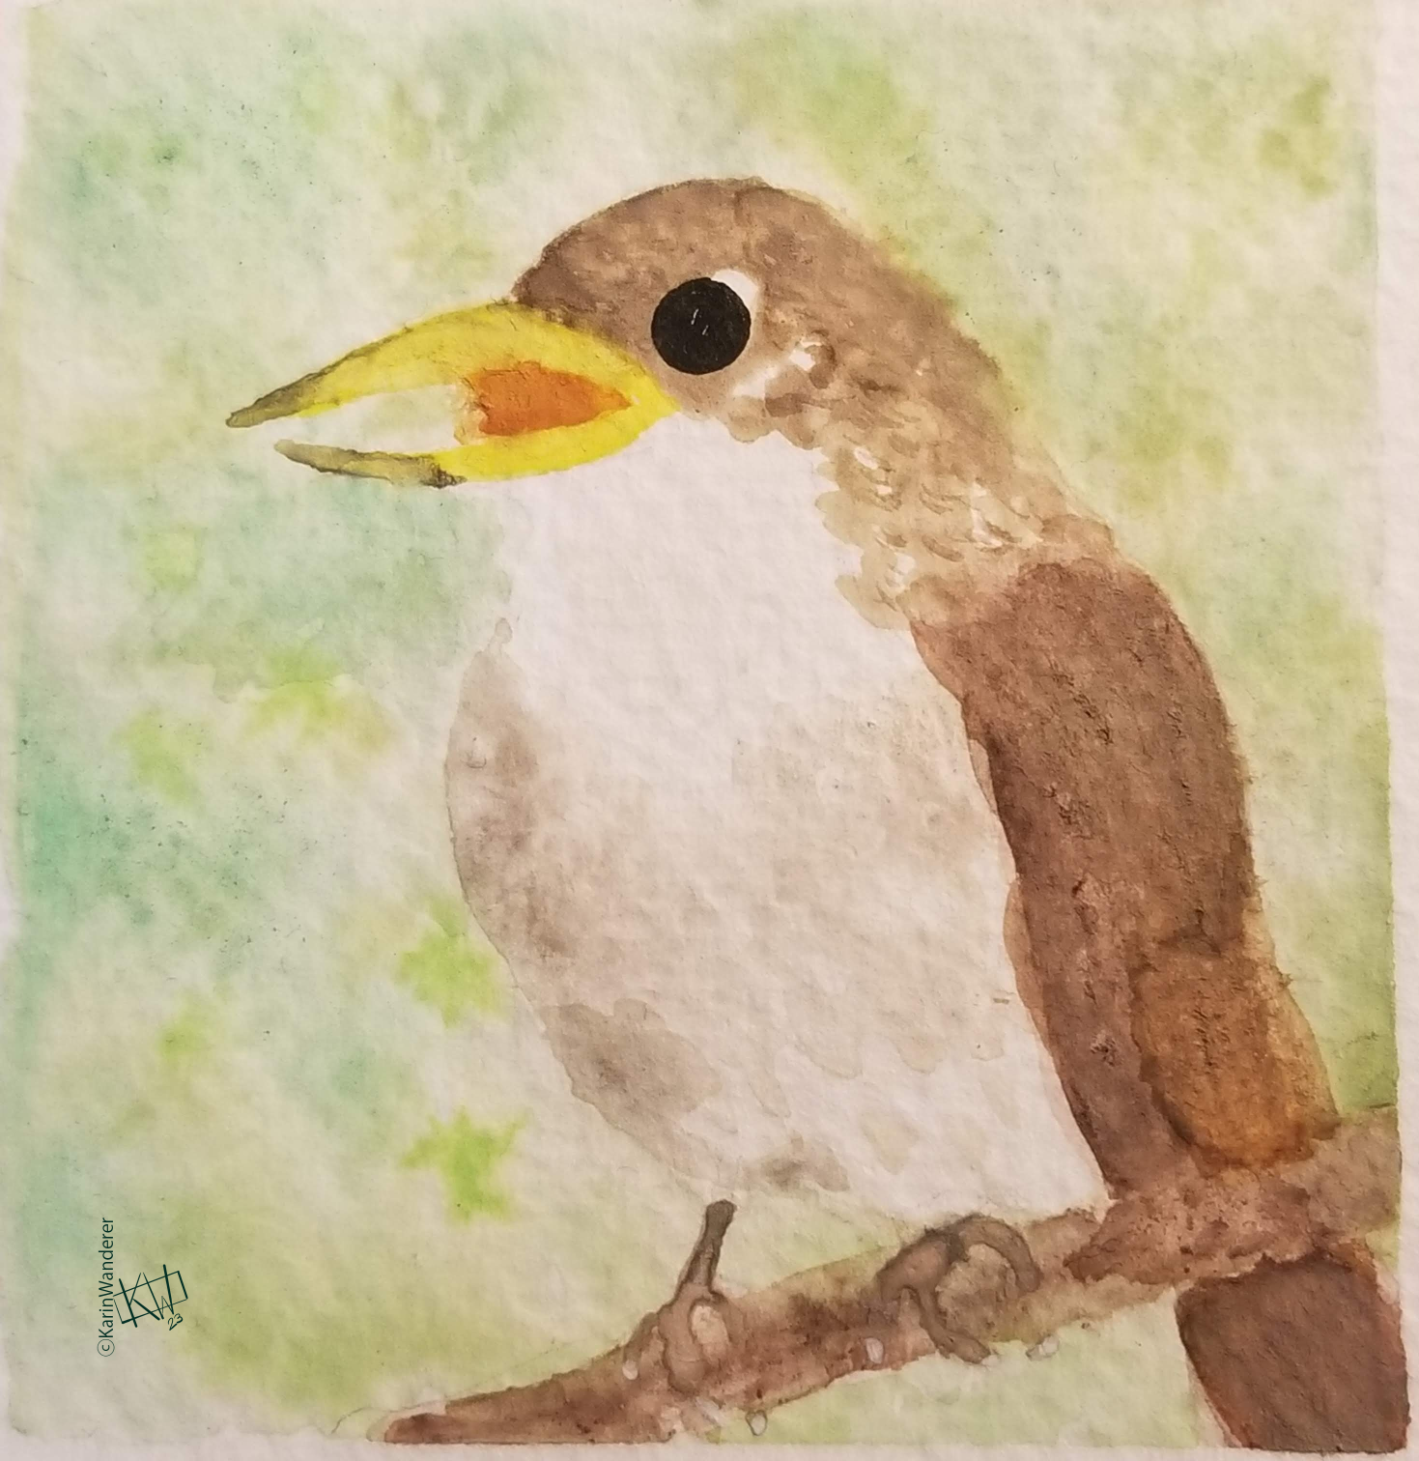 Watercolor of a nightingale singing while sitting on a branch.